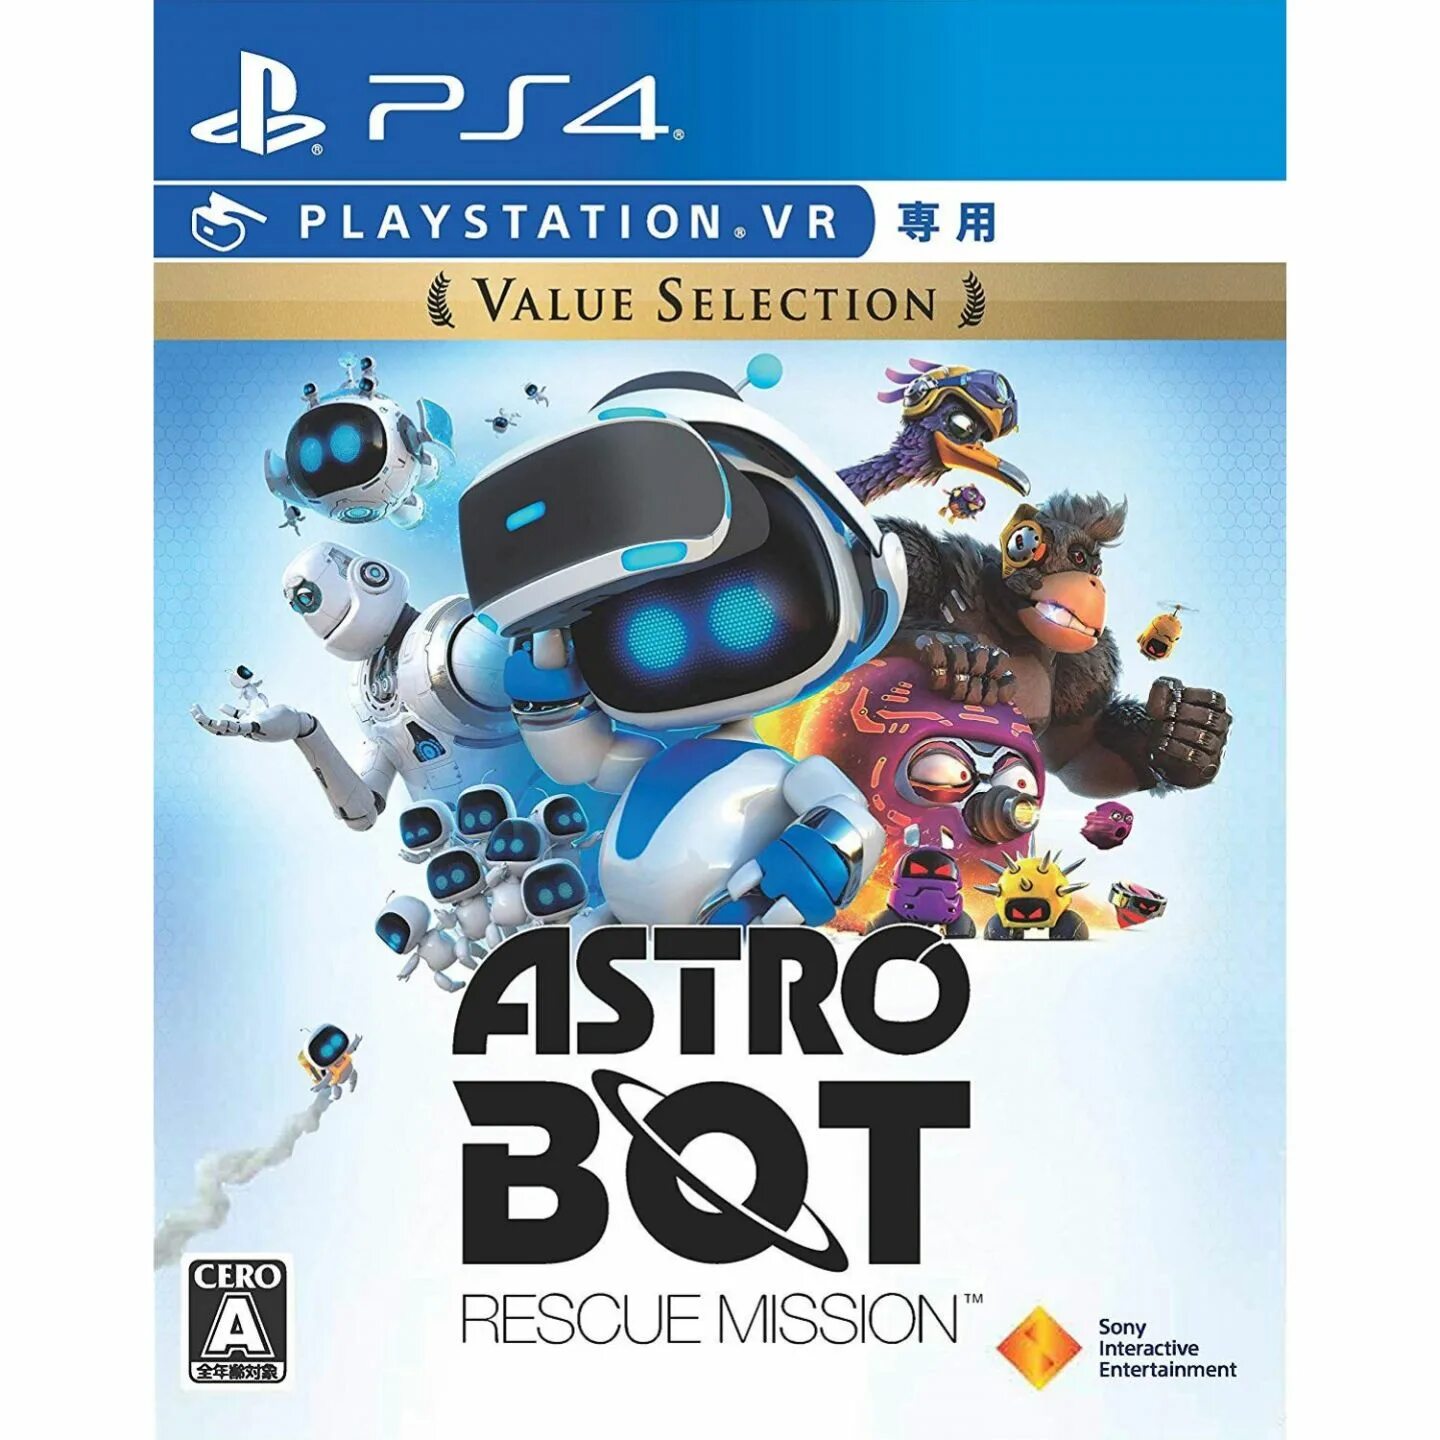 Astro bot ps4 VR. Astrobot Rescue Mission ps4. Astro bot Rescue Mission ps4. Фигурка Astro bot PLAYSTATION.